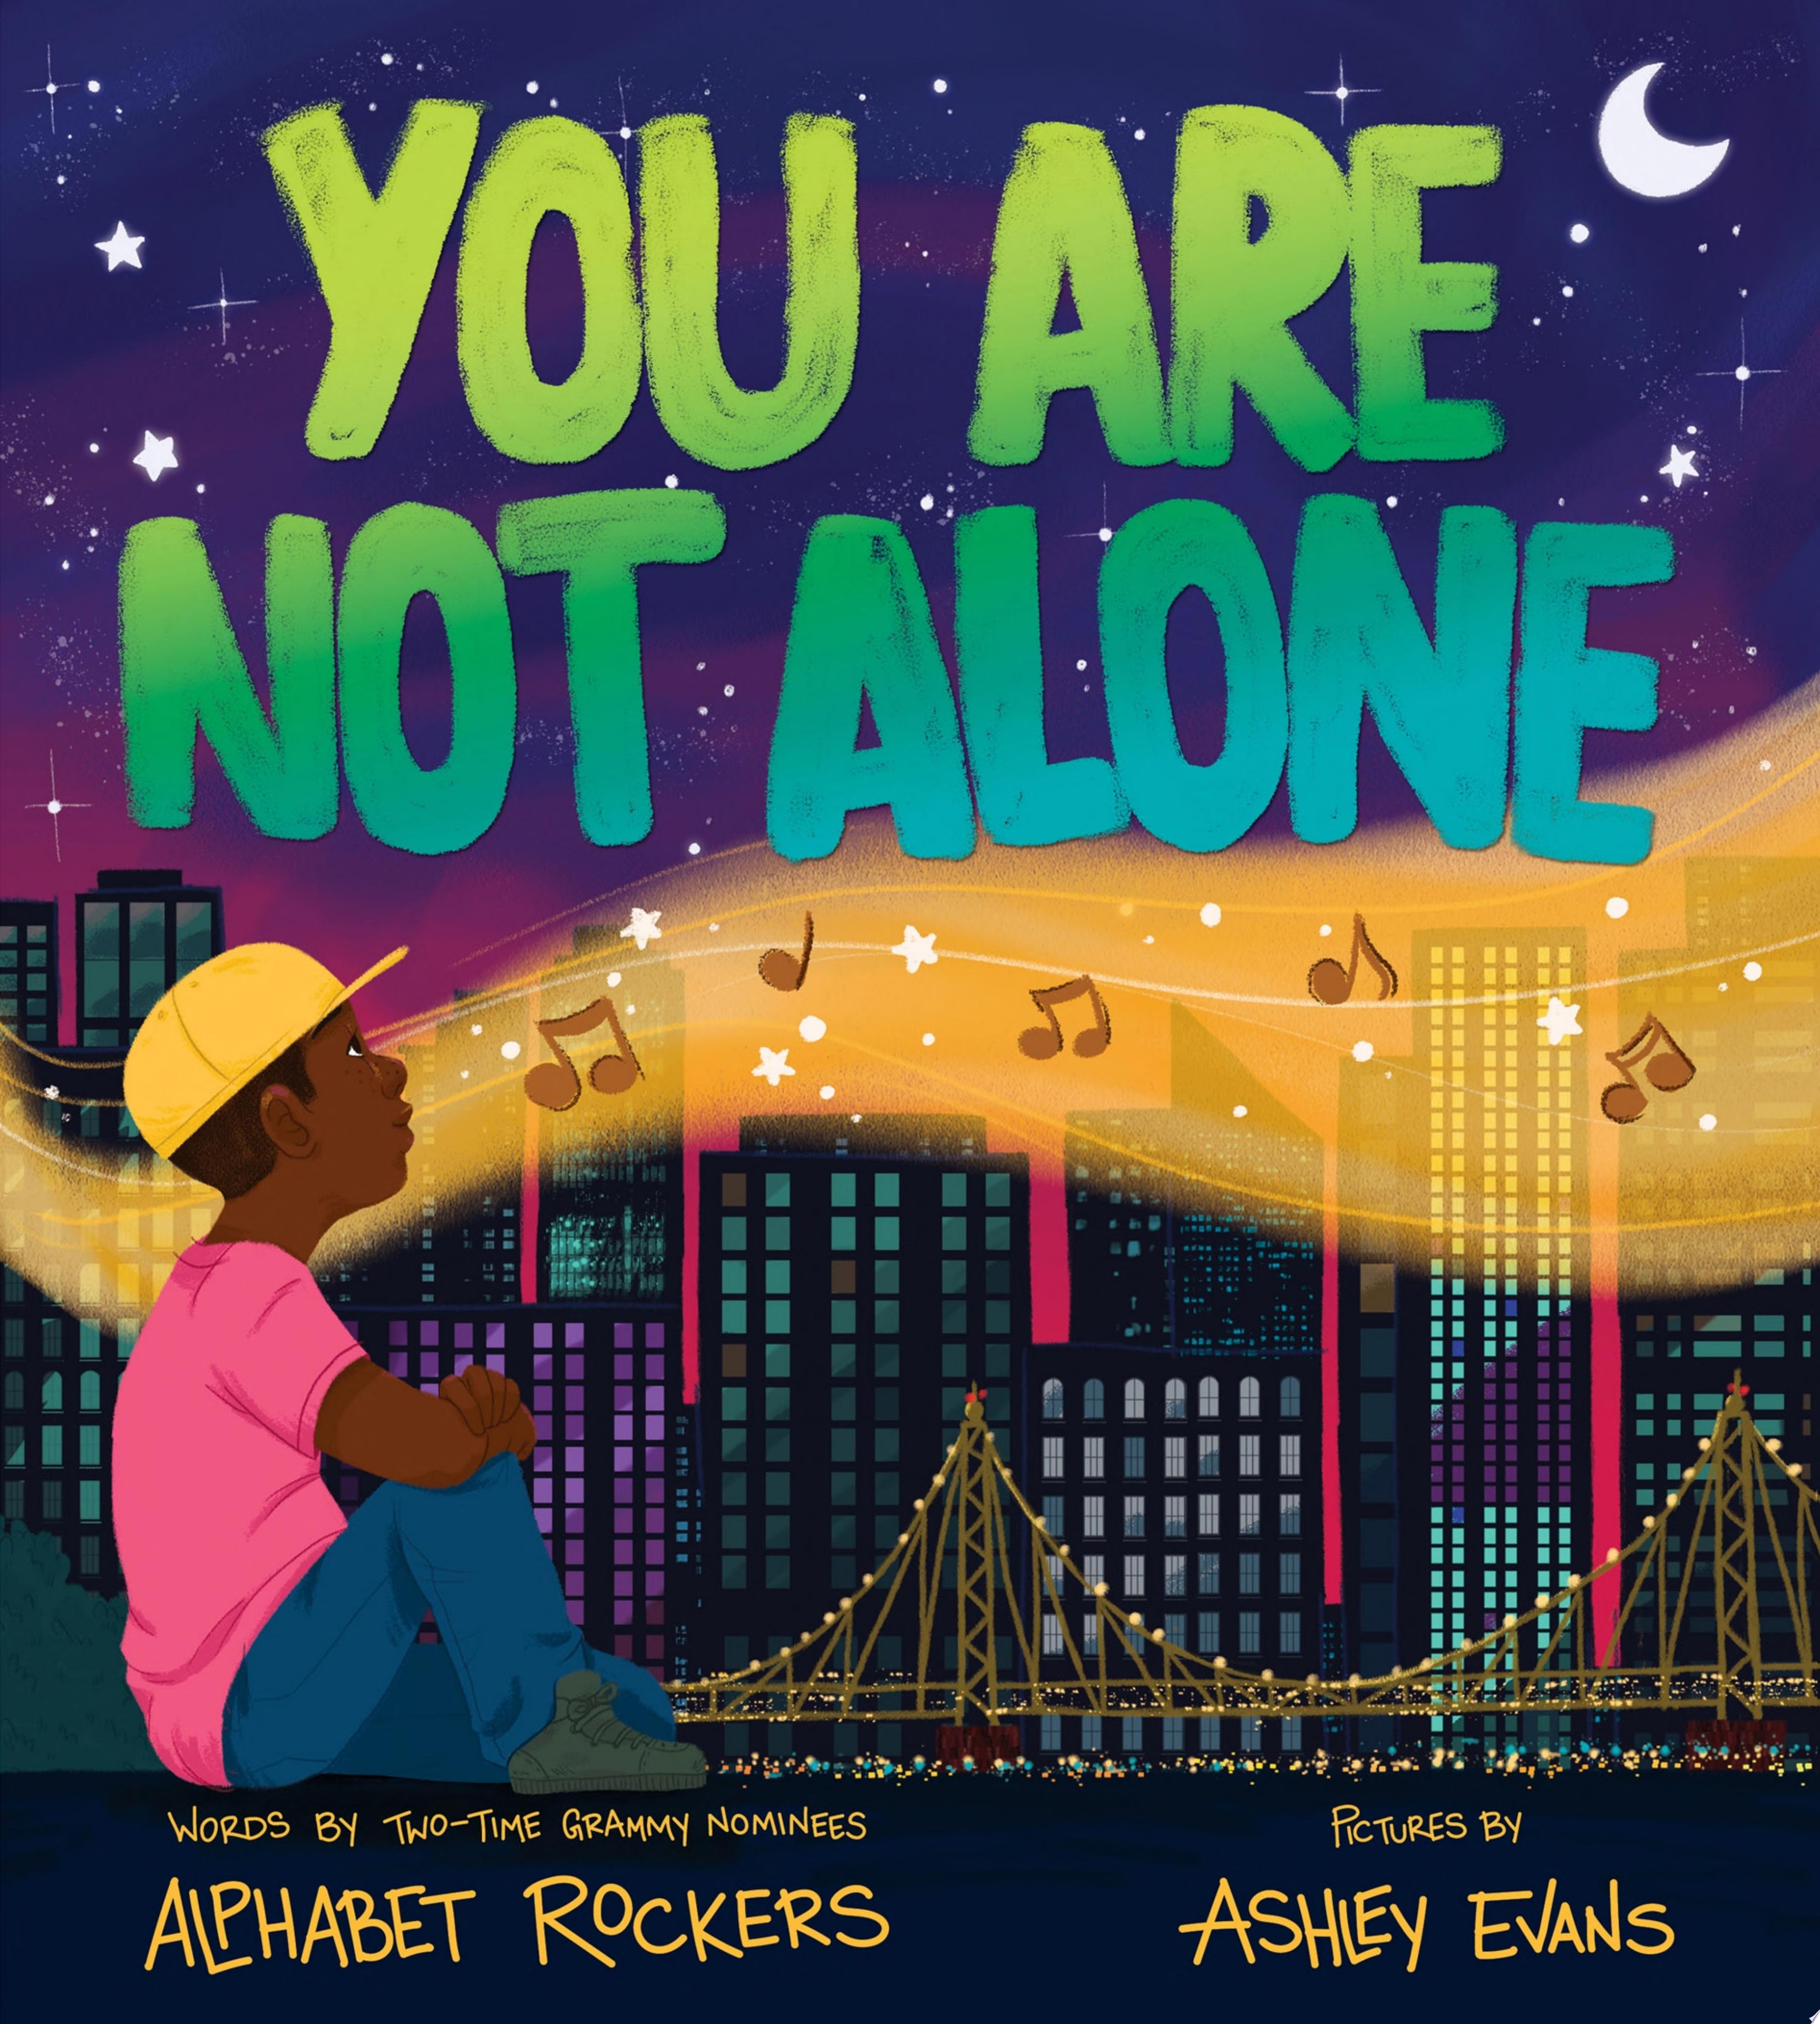 Image for "You Are Not Alone"